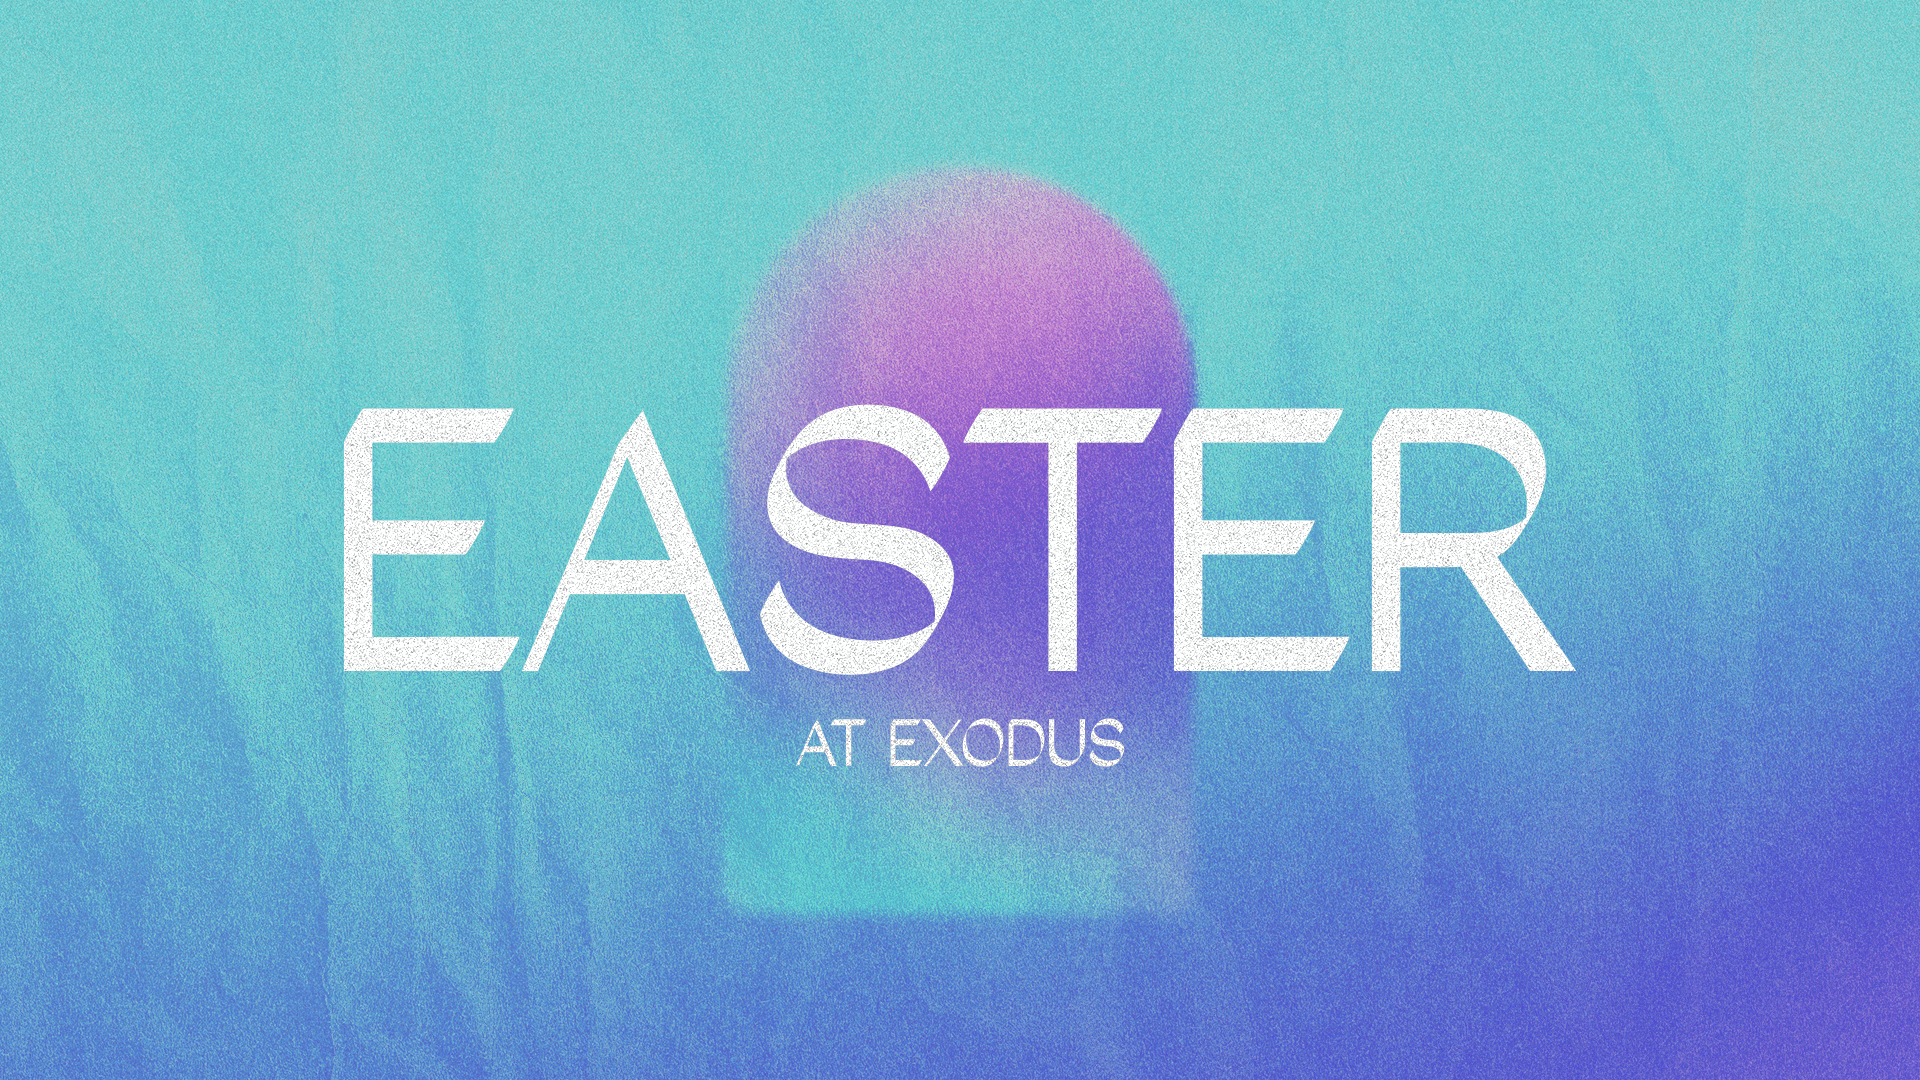 Easter at Exodus 2022